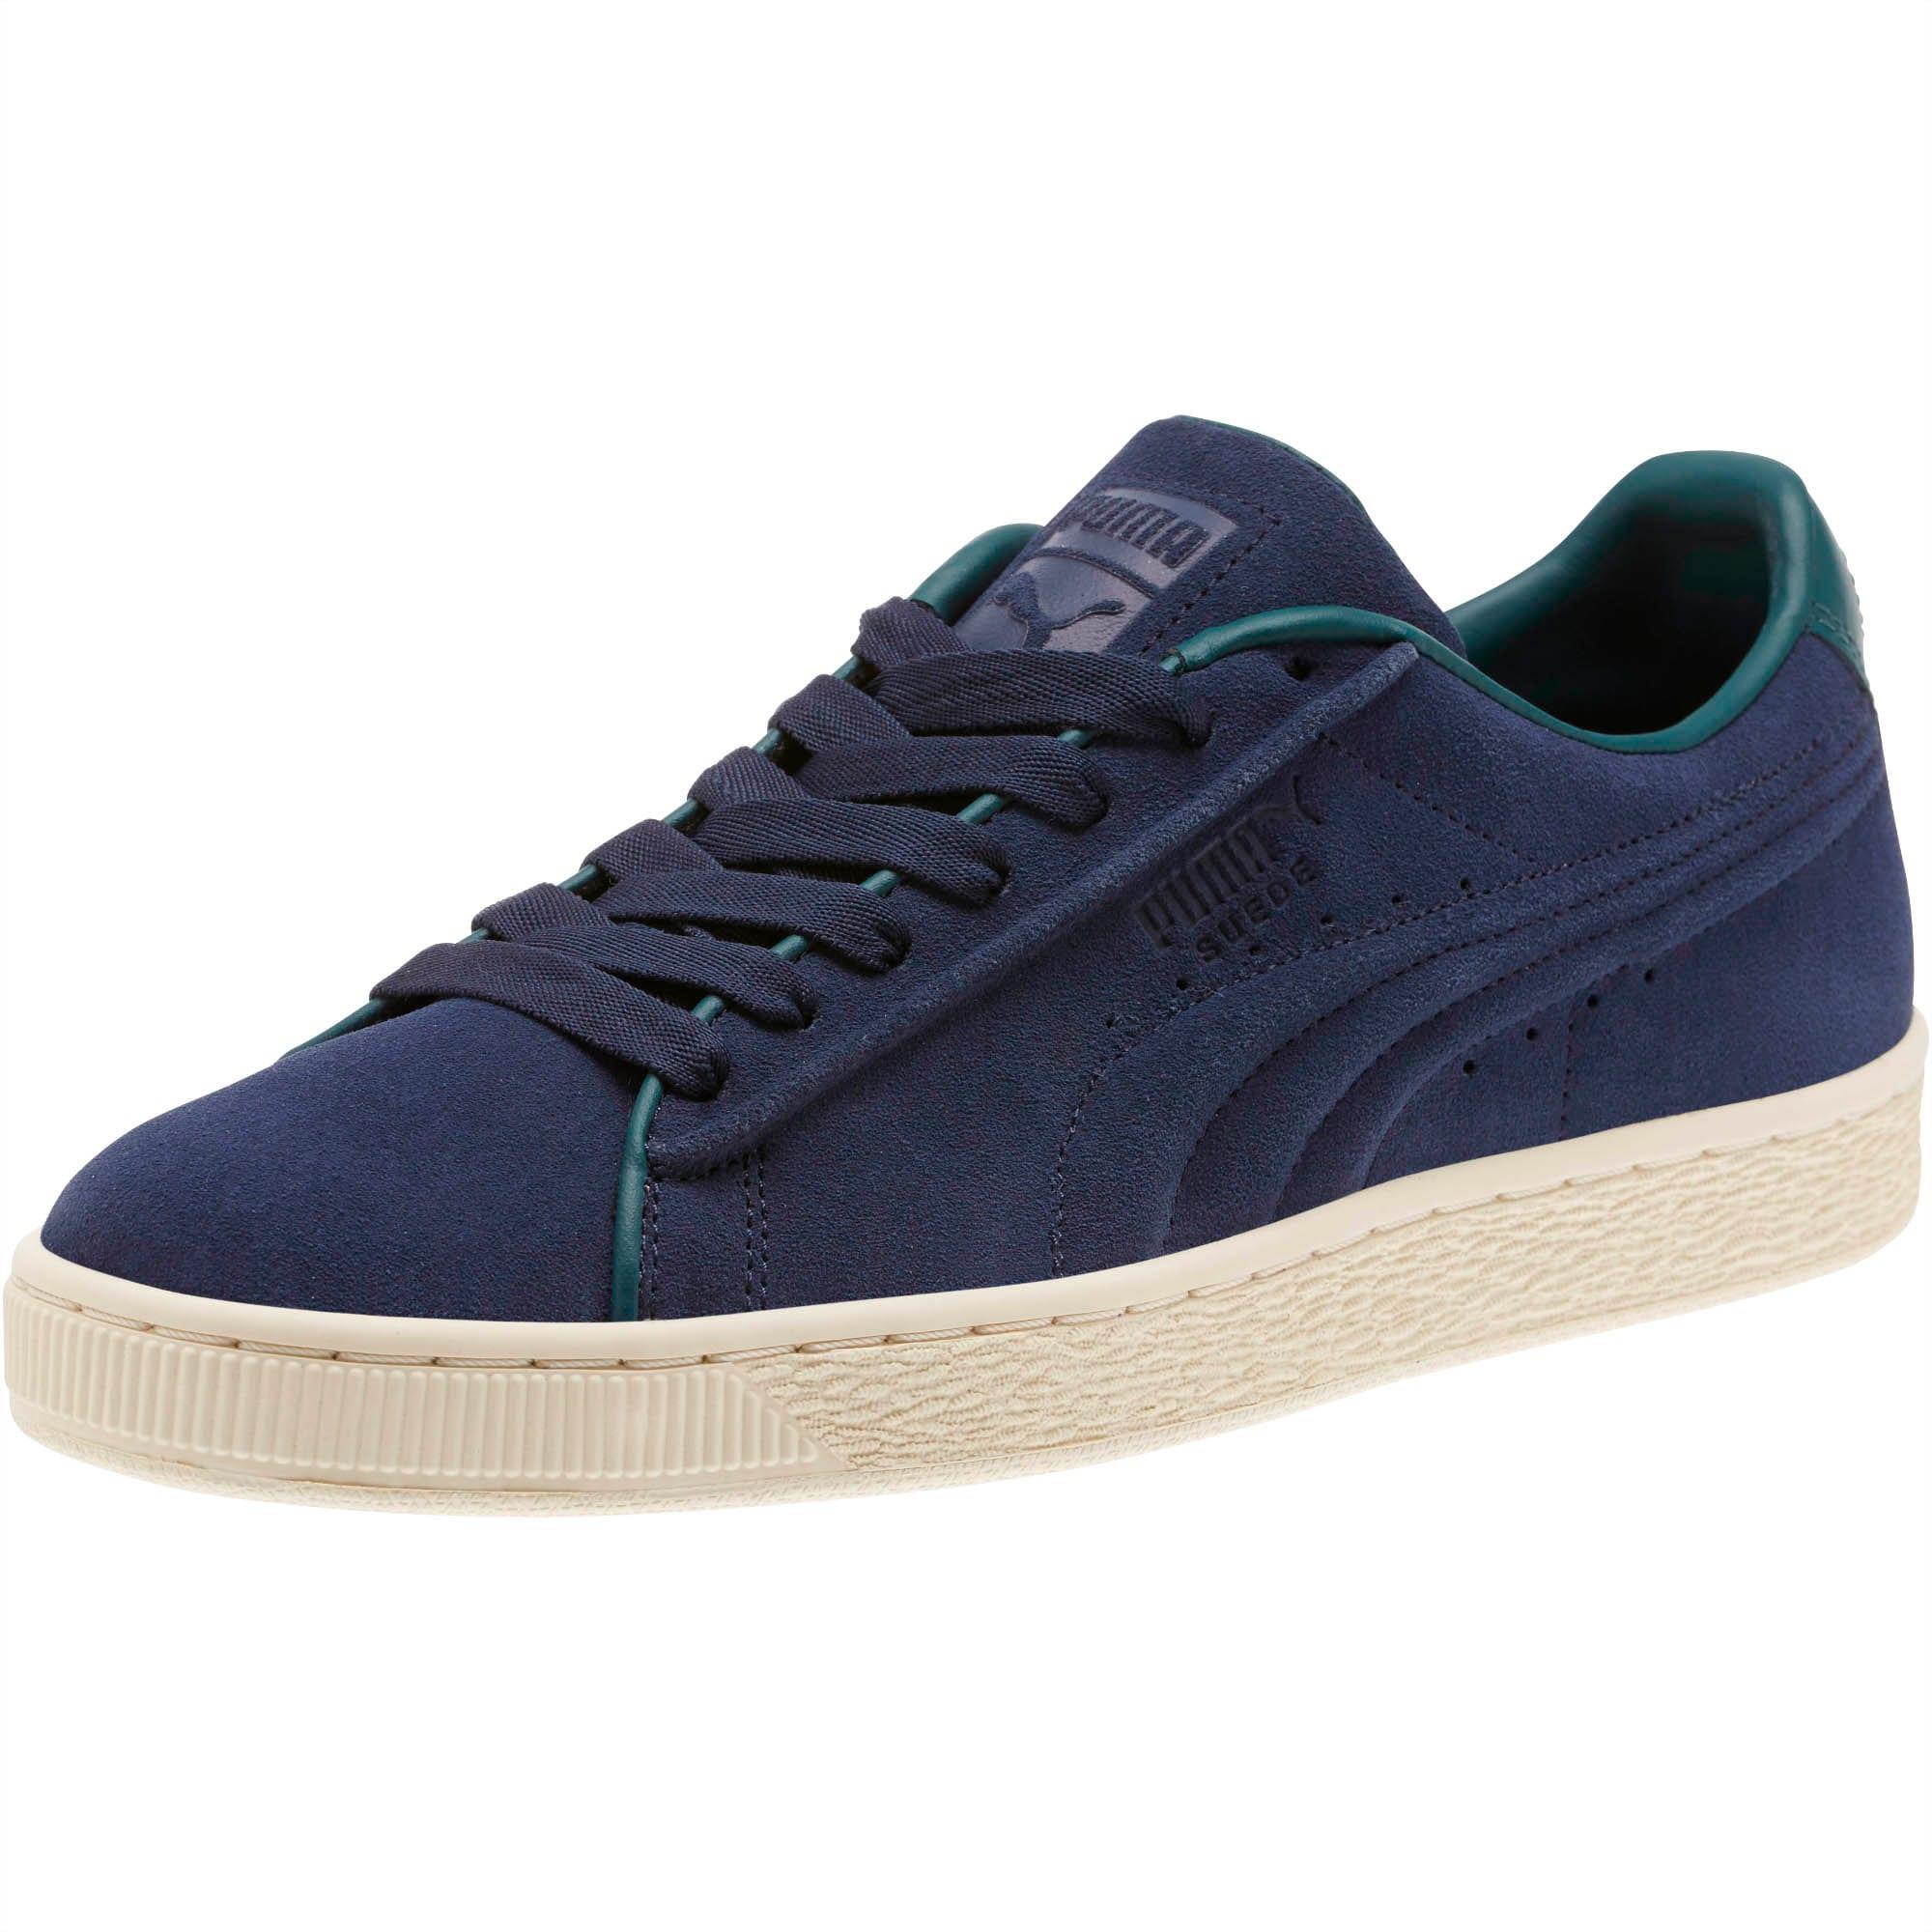 PUMA Suede Classic Raised Formstrip Sneakers in 03 (Blue) for Men - Lyst